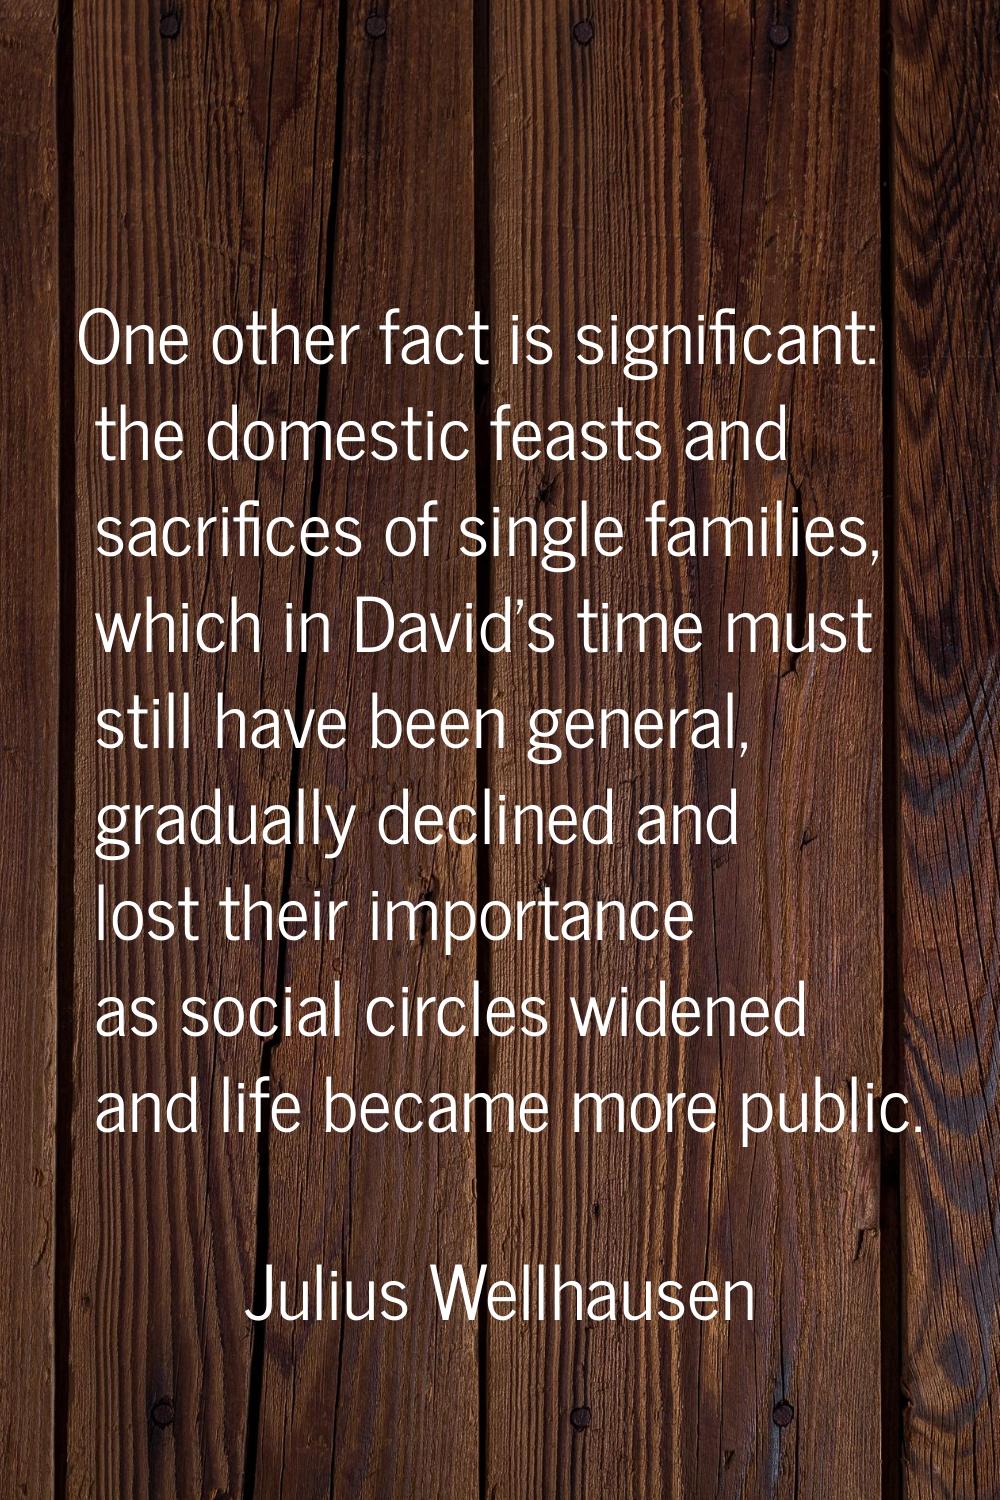 One other fact is significant: the domestic feasts and sacrifices of single families, which in Davi